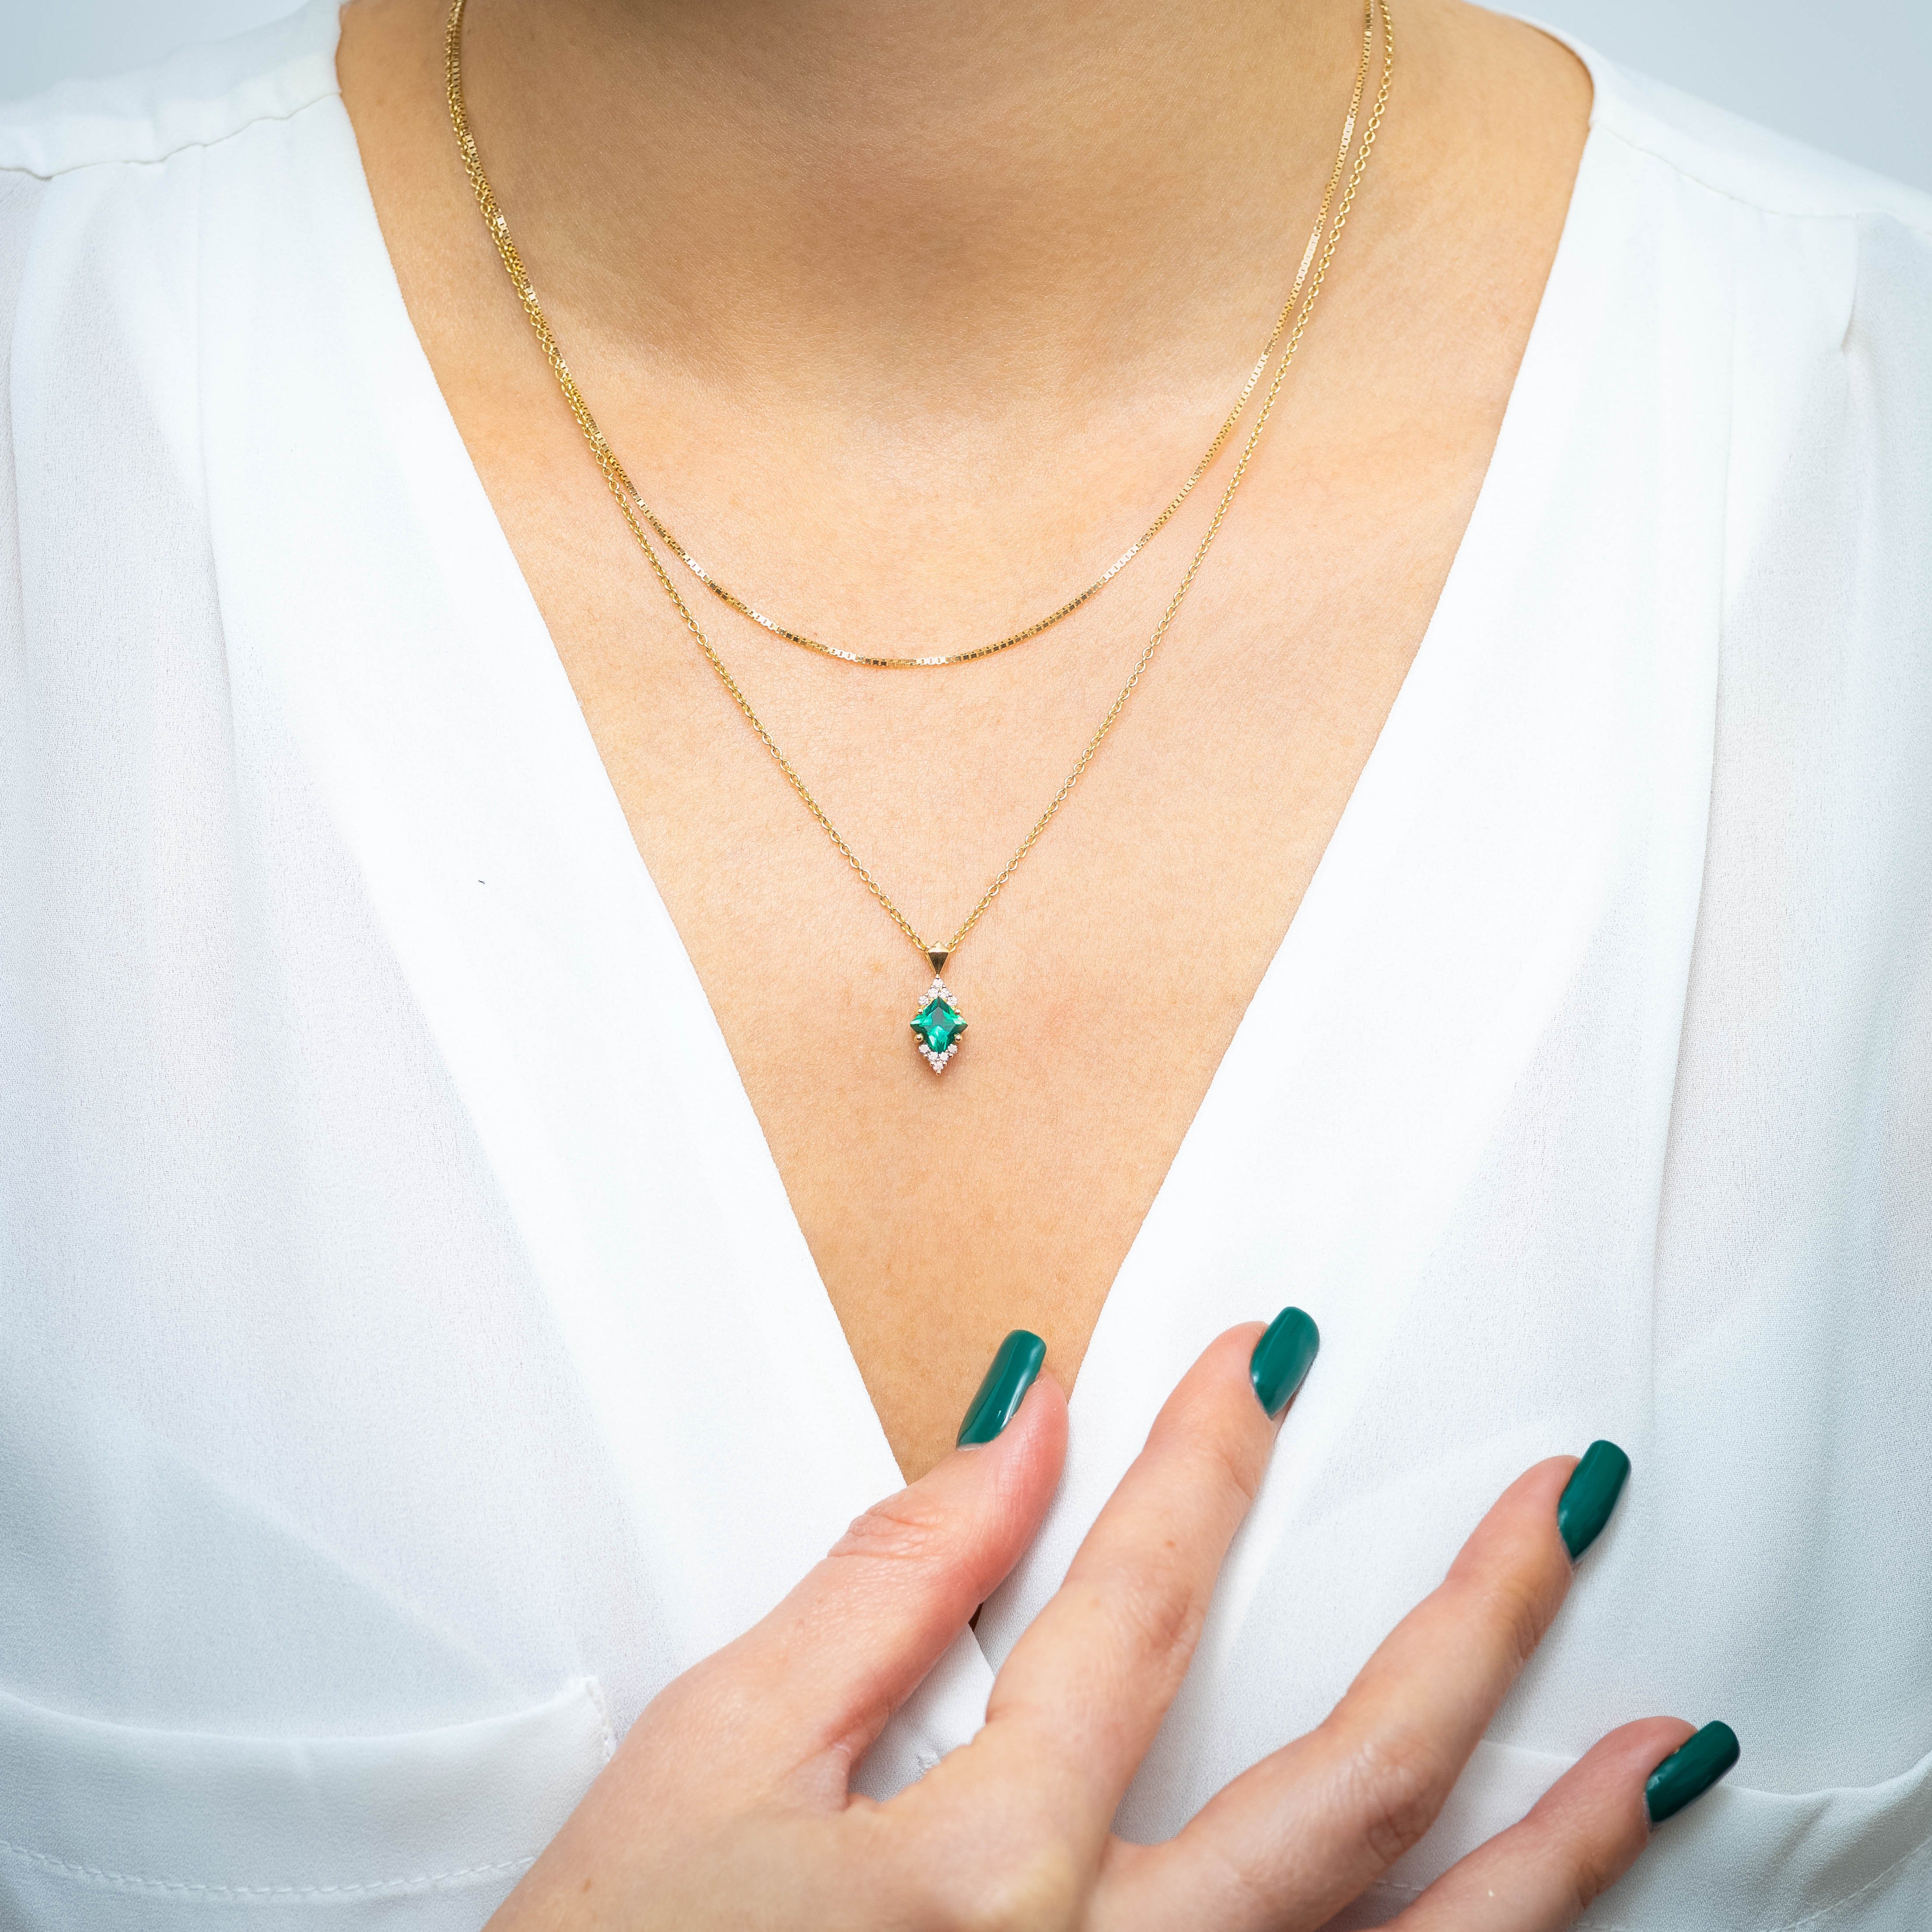 Juliette Necklace With Diamonds and Emerald